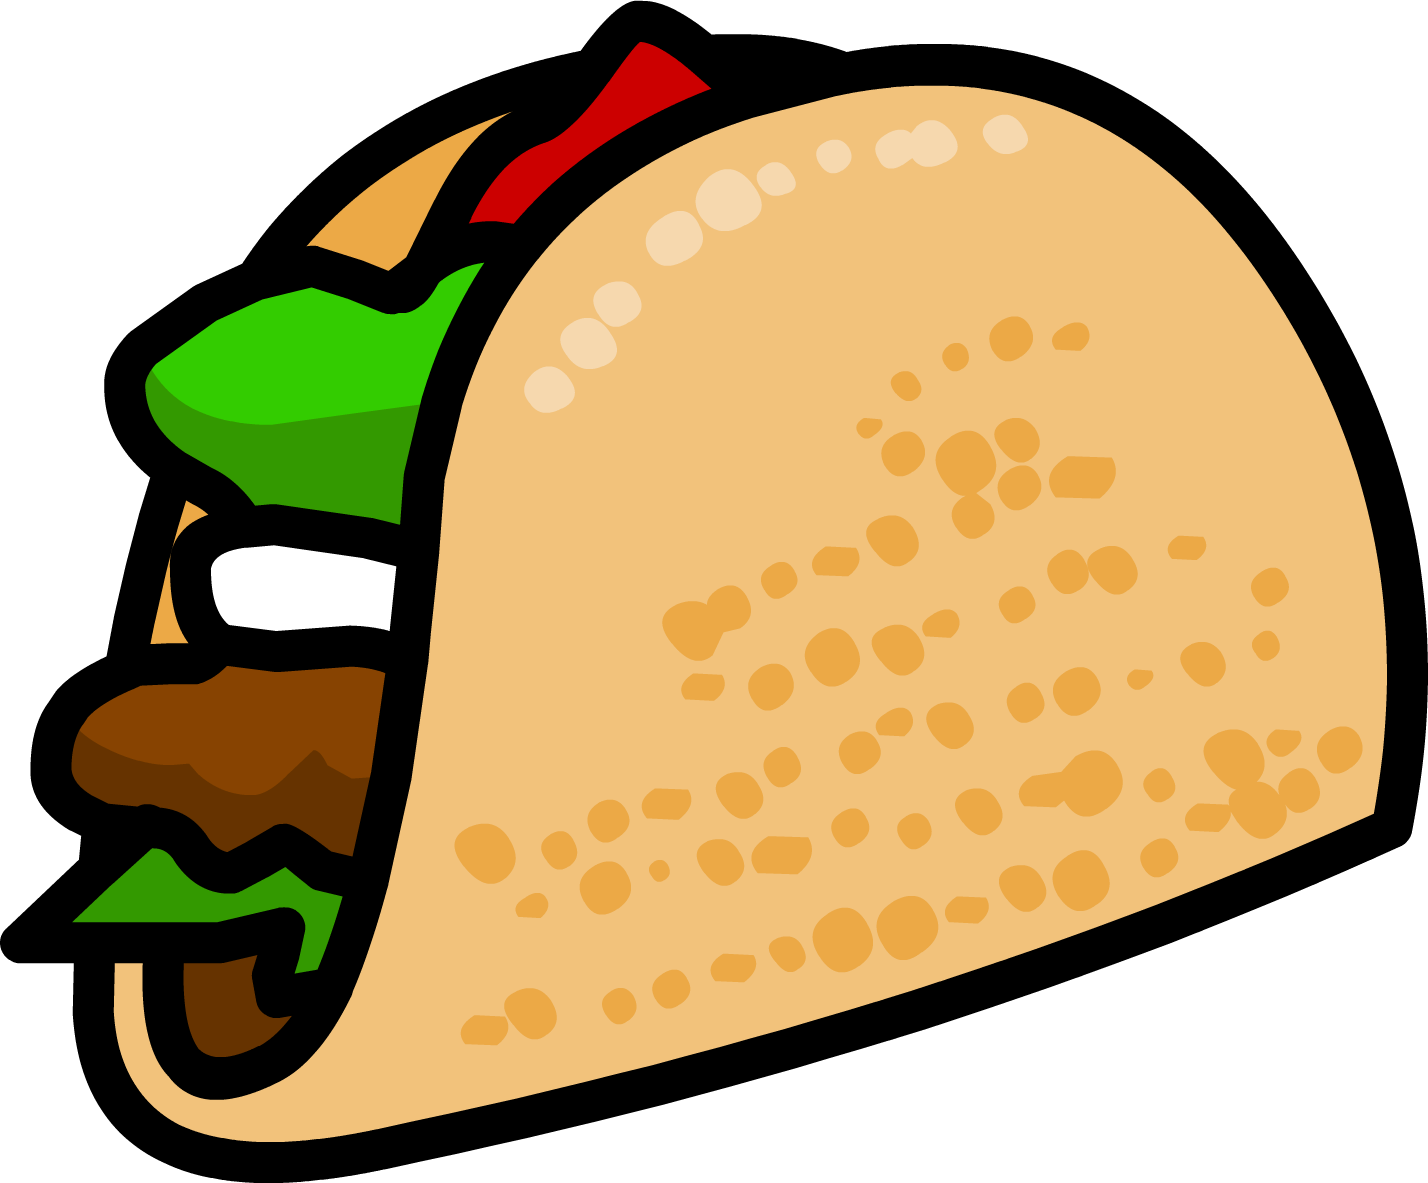 Taco clipart free clip art images 3 image 3